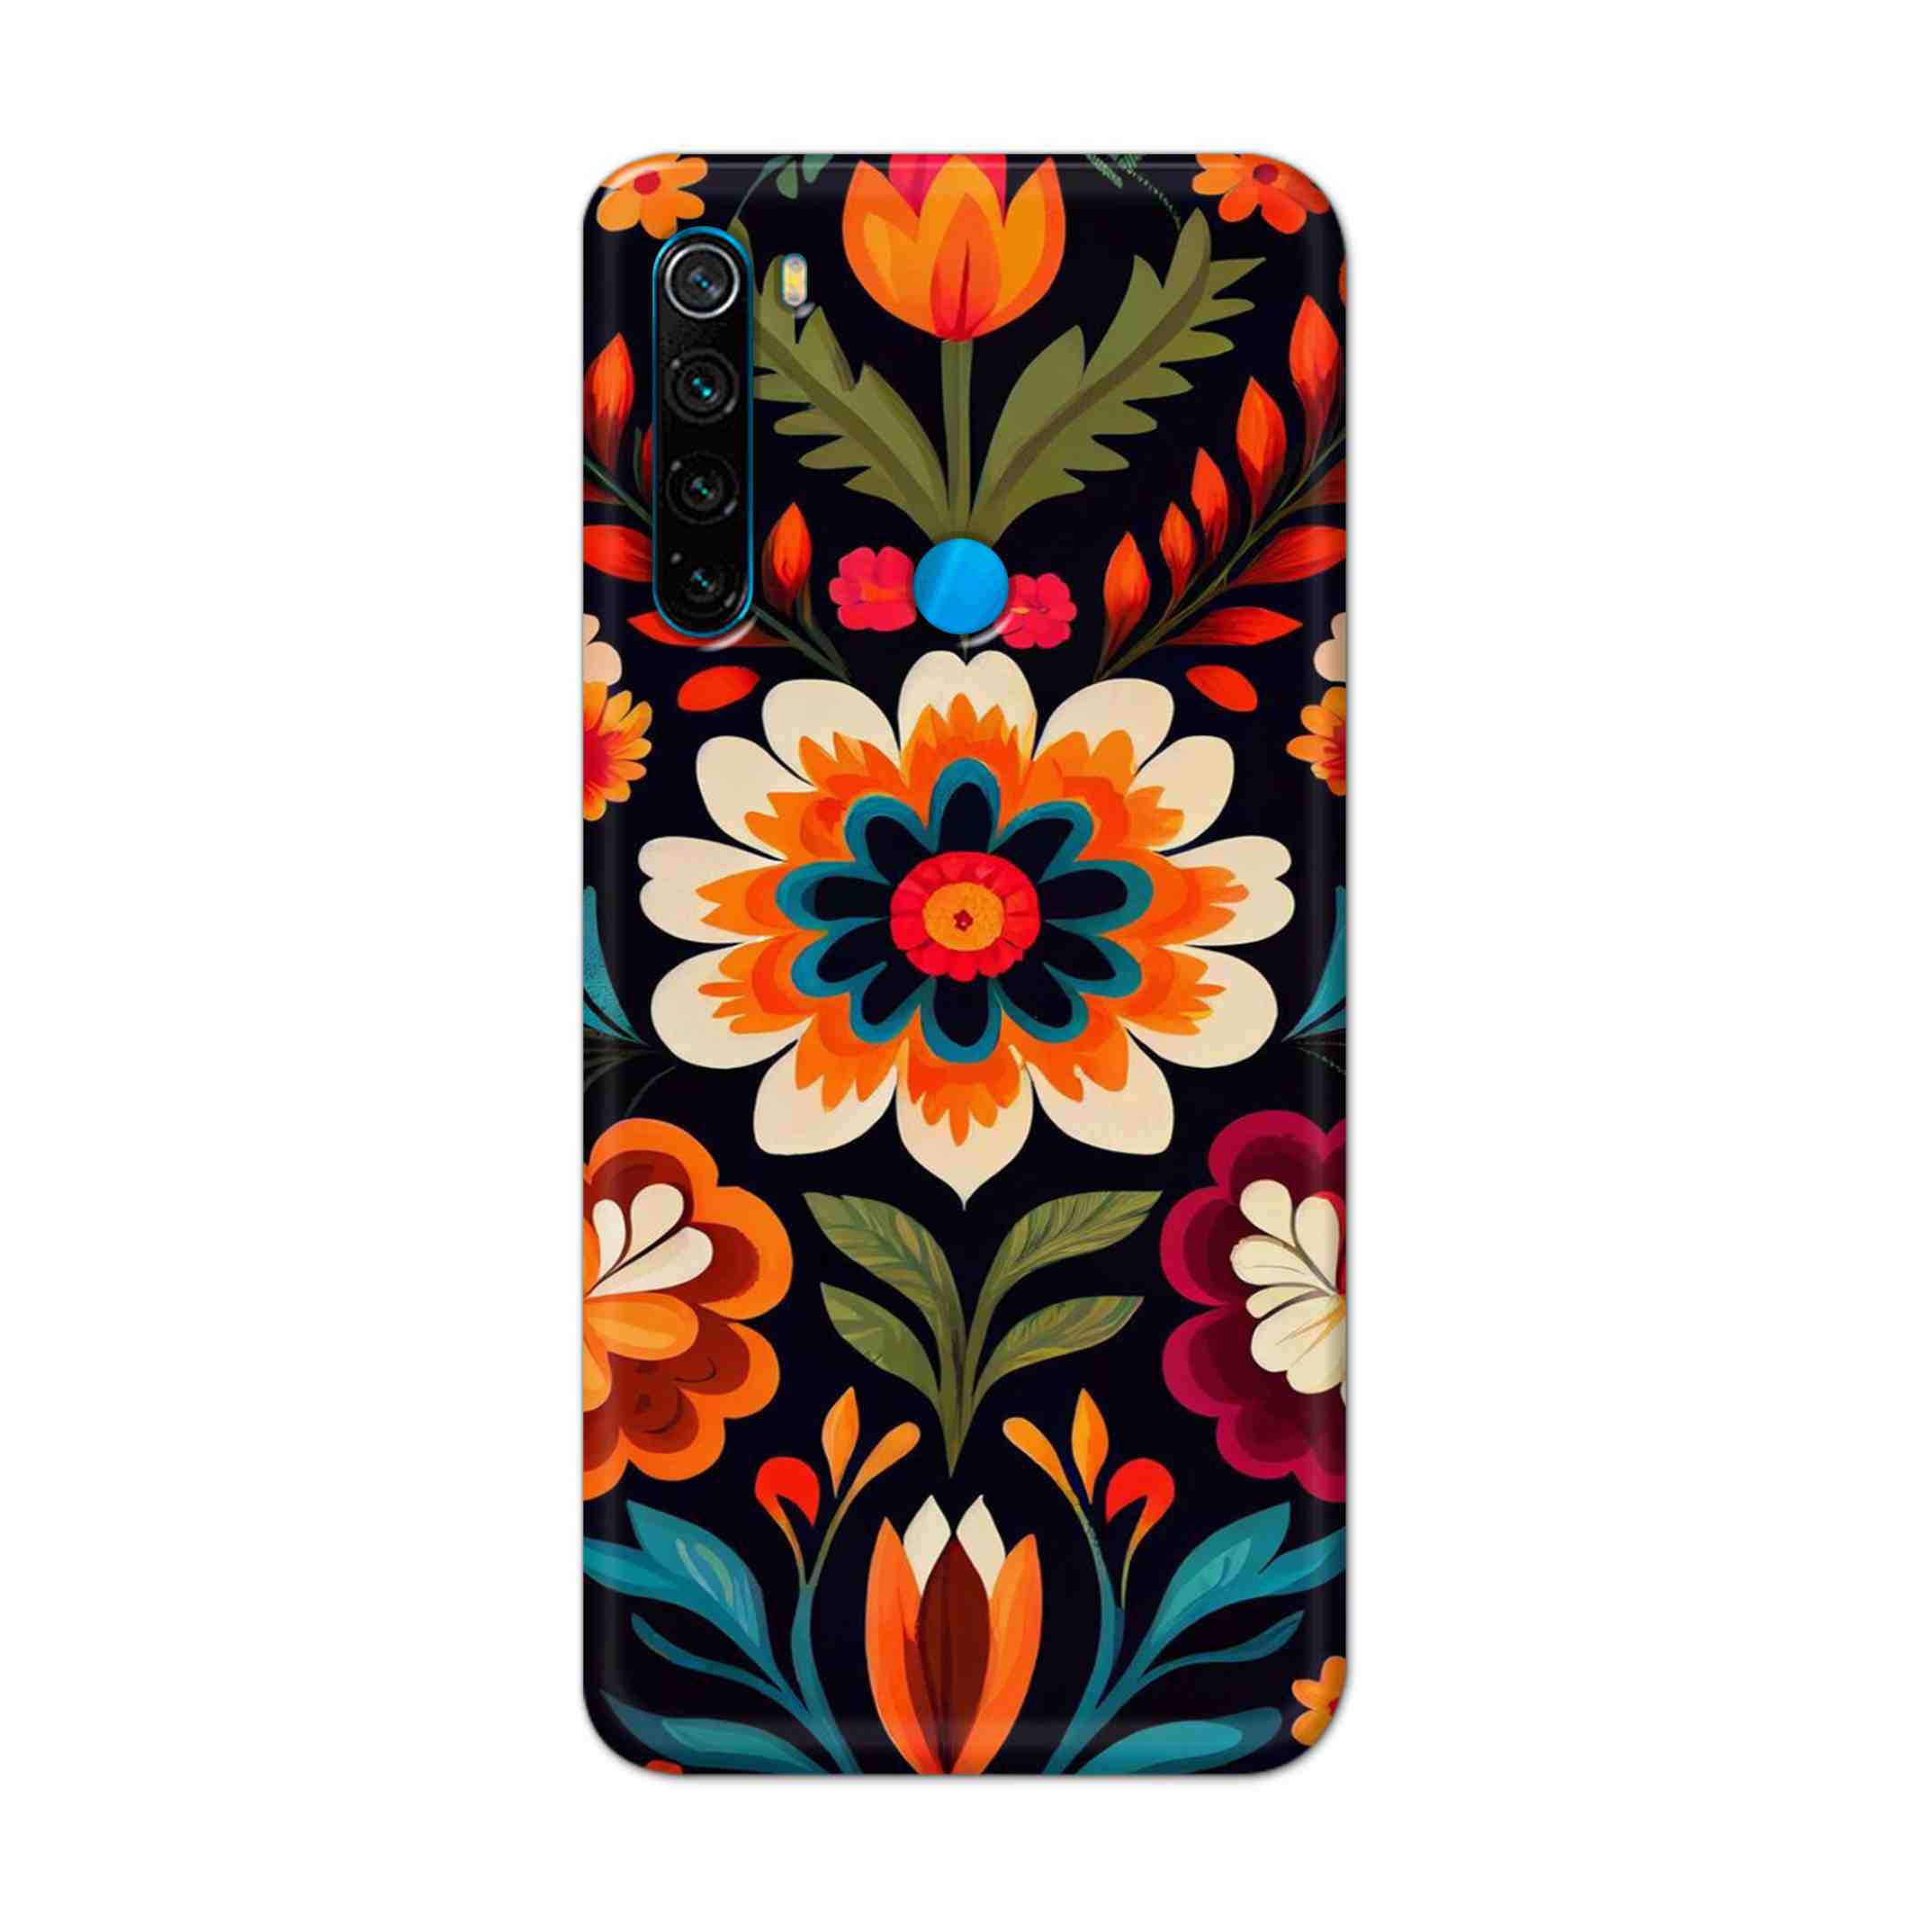 Buy Flower Hard Back Mobile Phone Case Cover For Xiaomi Redmi Note 8 Online